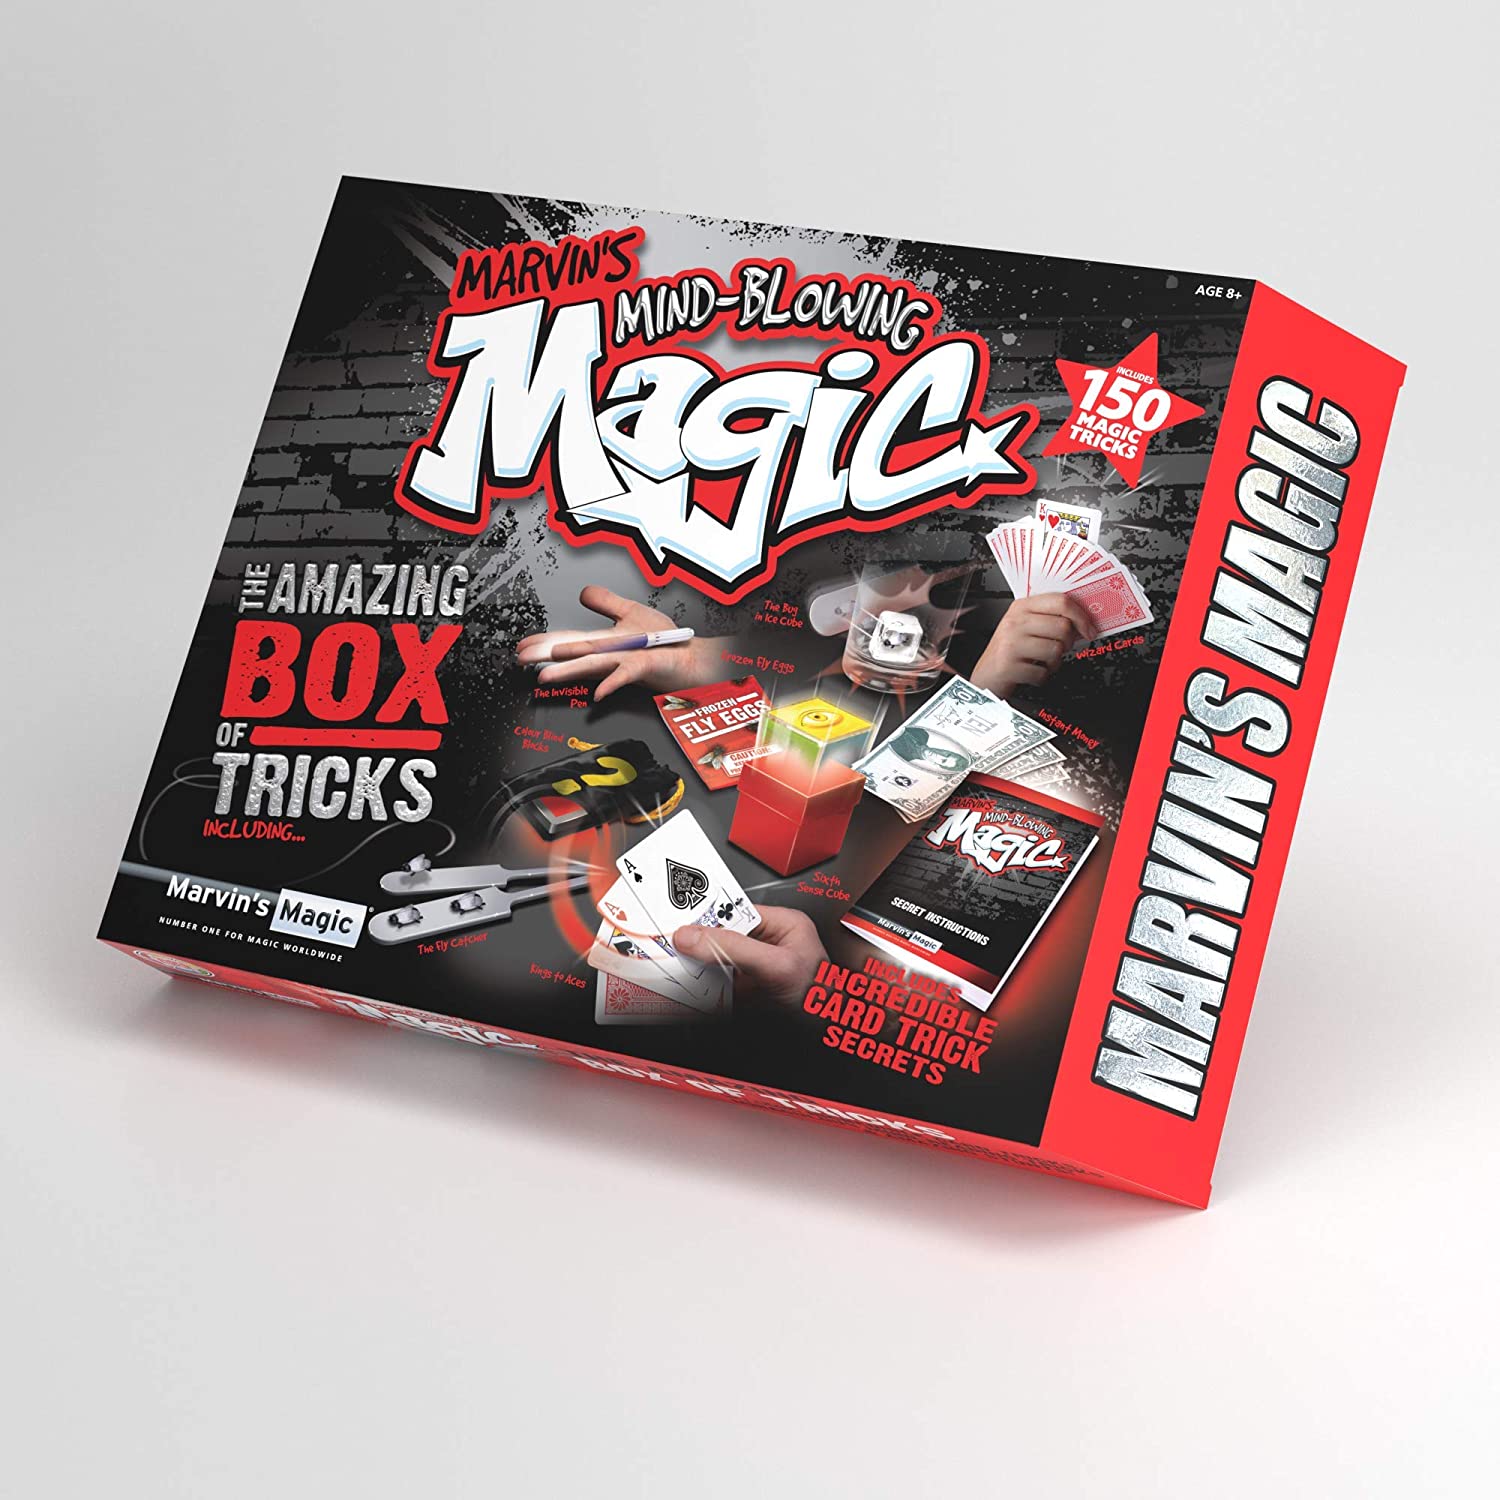 Marvin's Mind-Blowing Magic Amazing Box of 150 Tricks